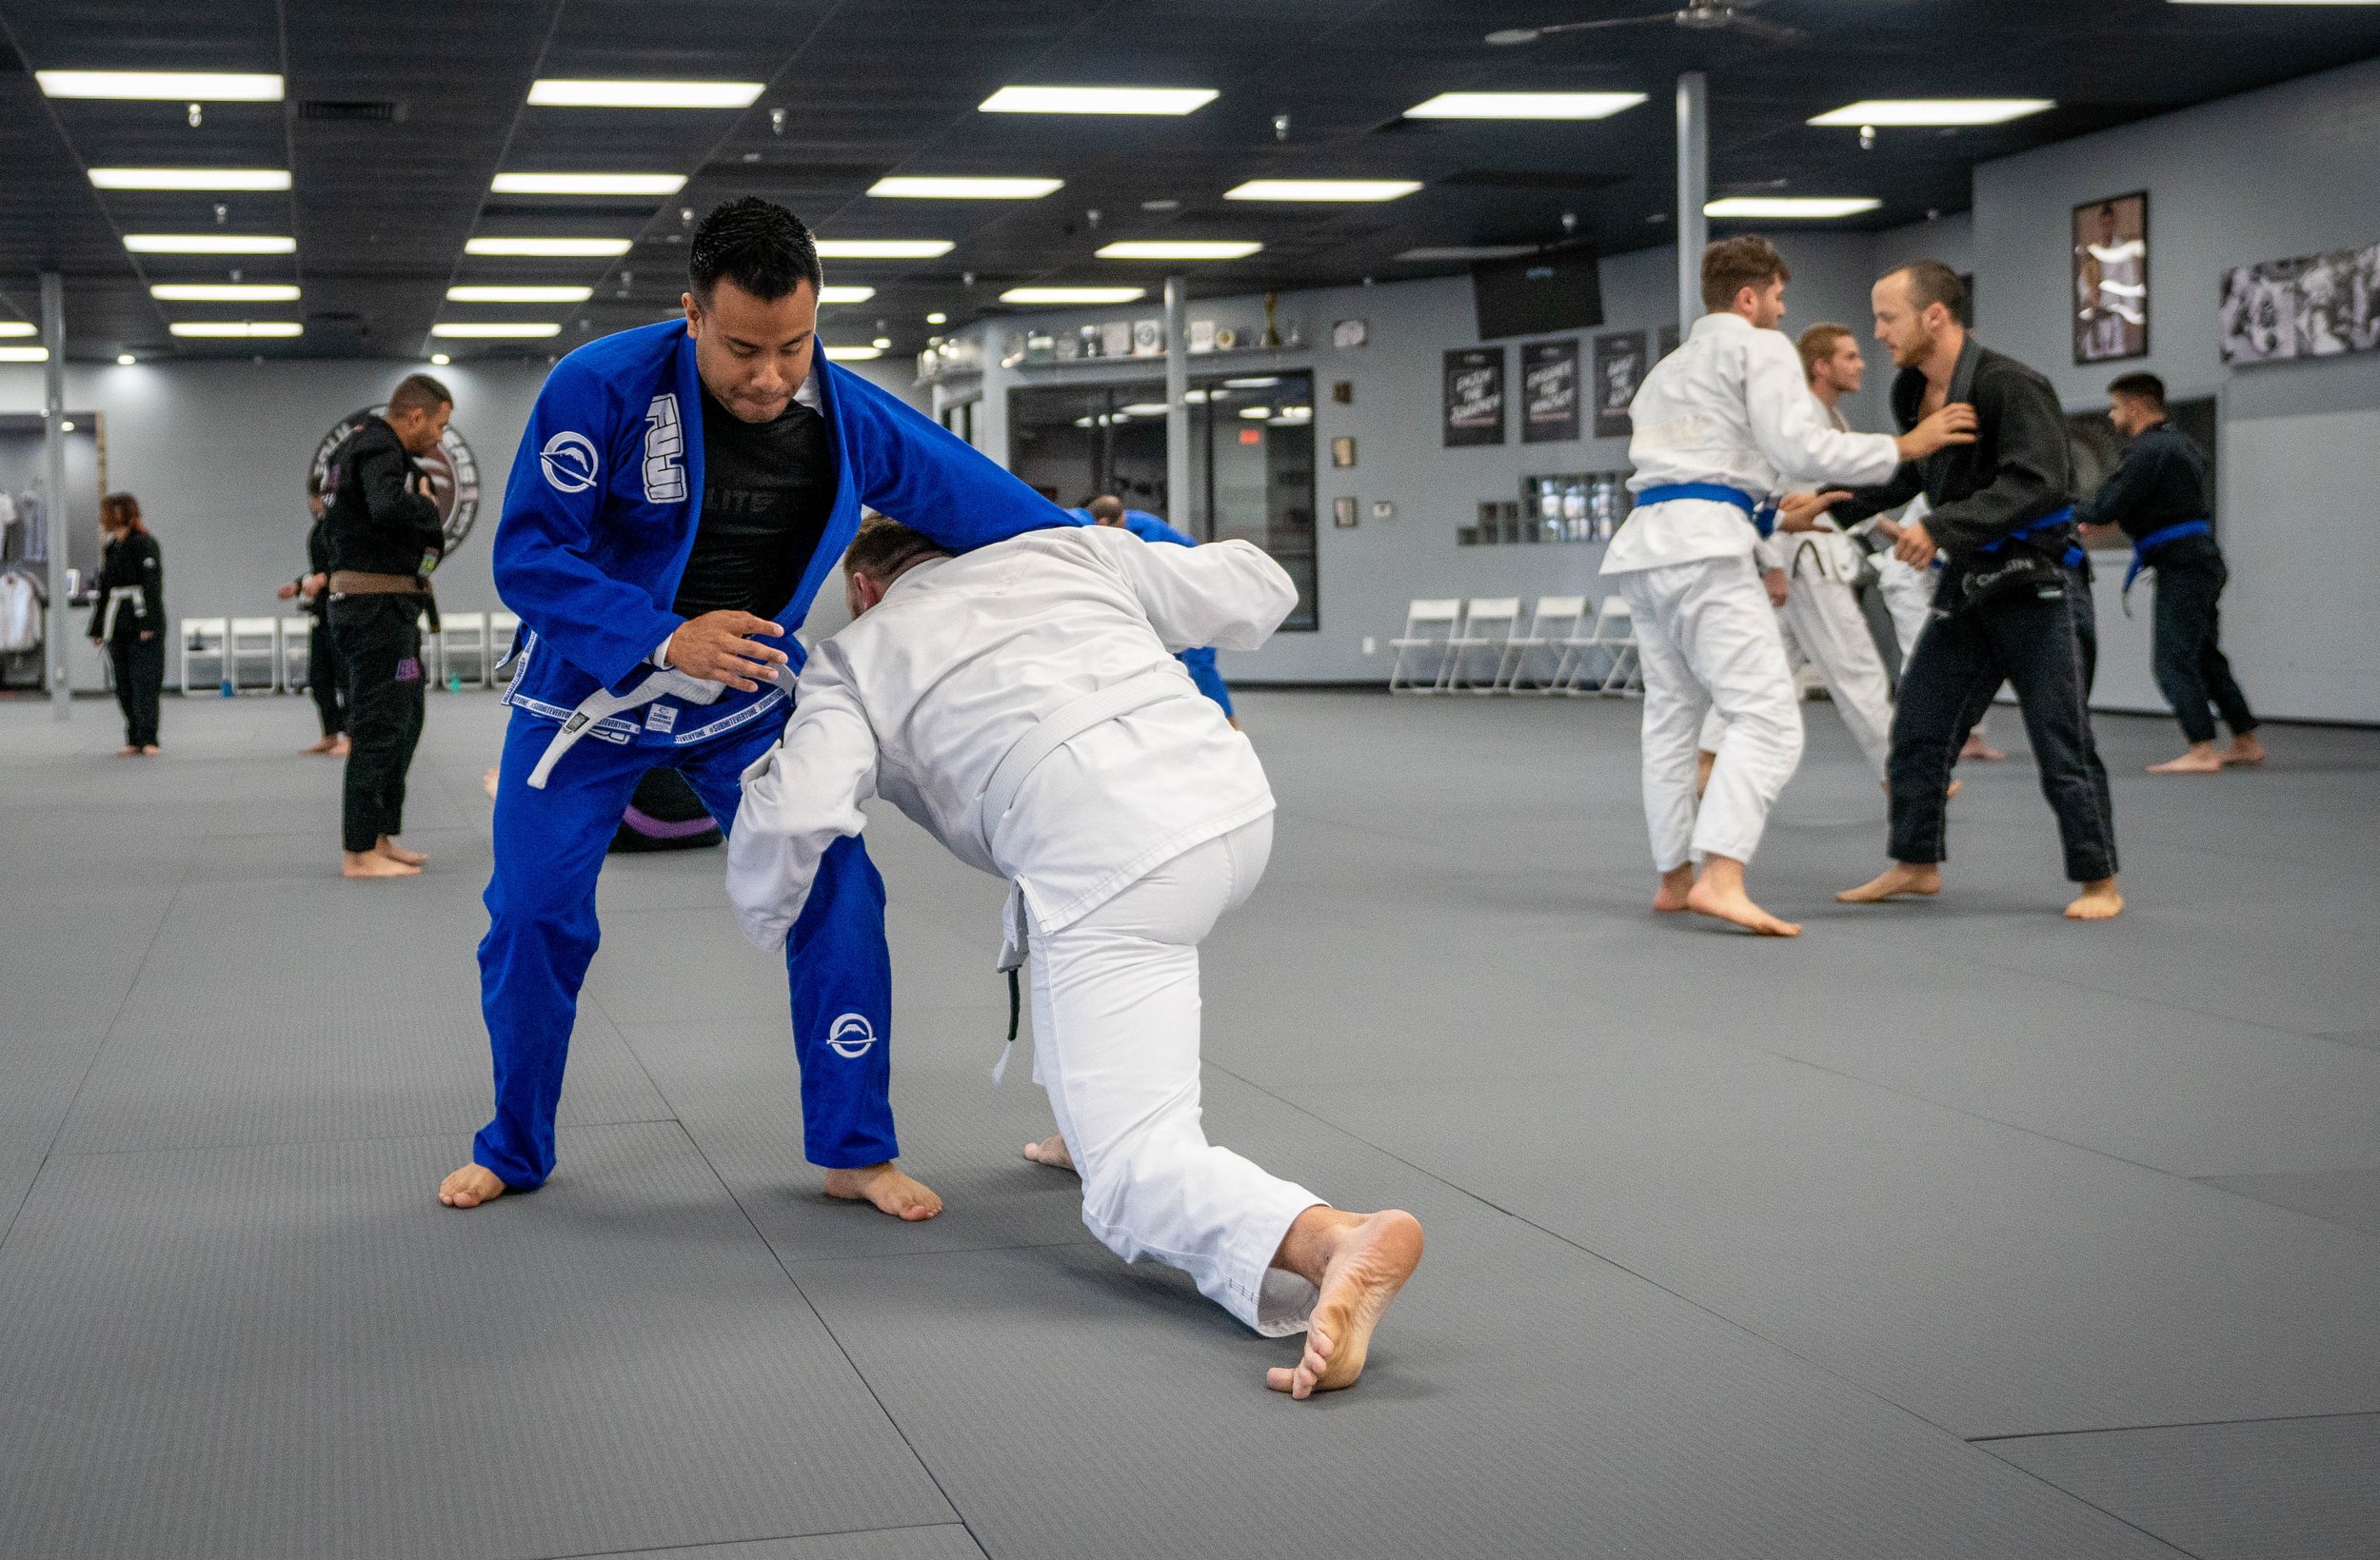 Huge achievement for me personally : bjj